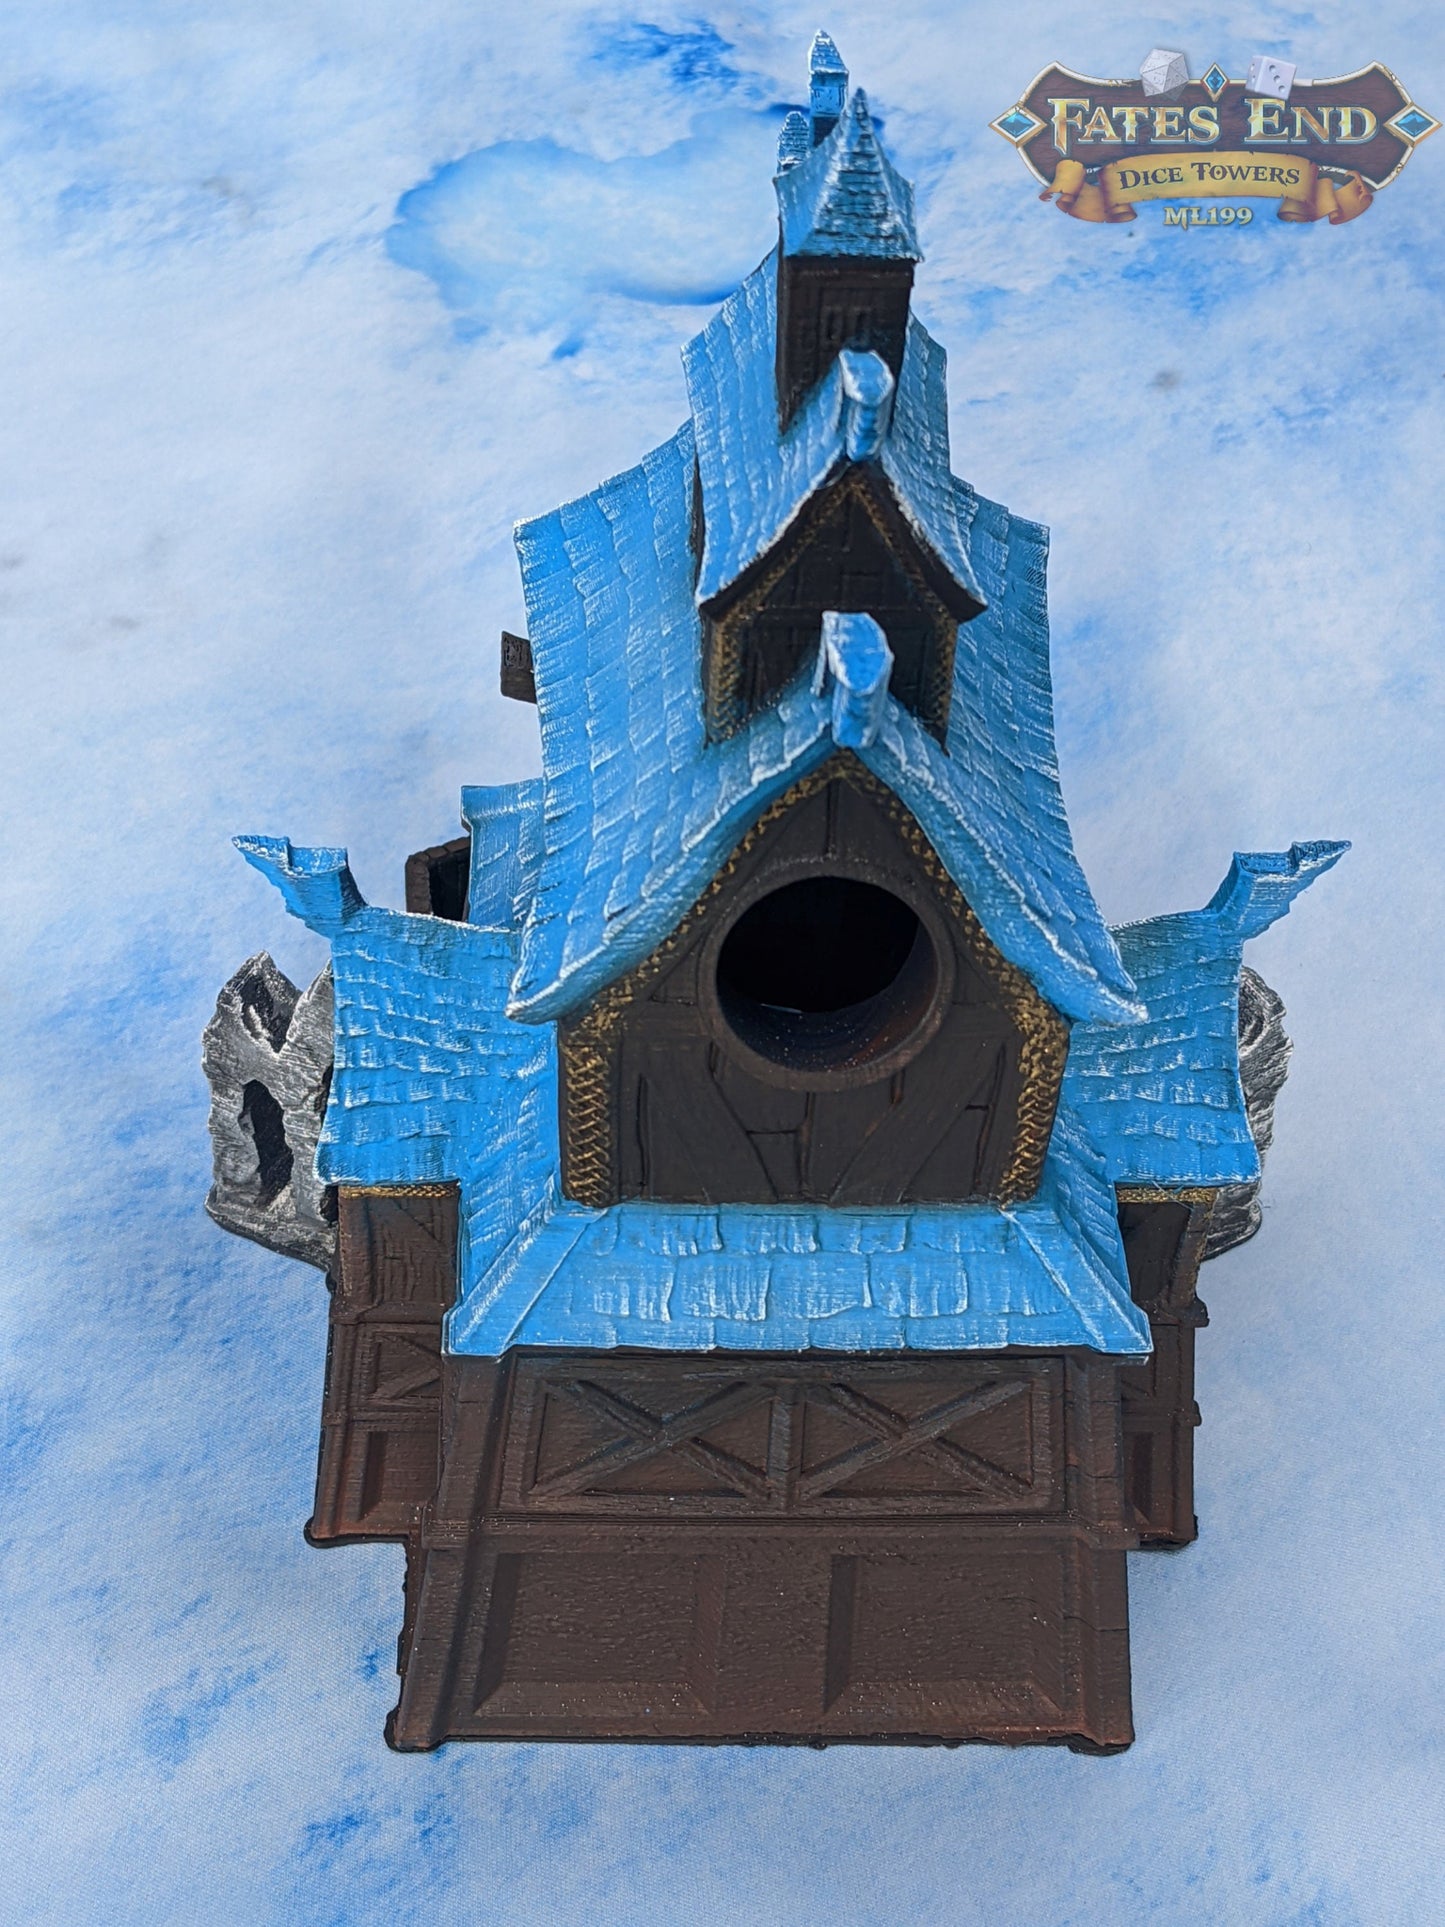 Valkyrie - Viking 3D Printed Dice Tower - Fate's End Collection - Unleash Valhalla's Spirit with Every Roll.